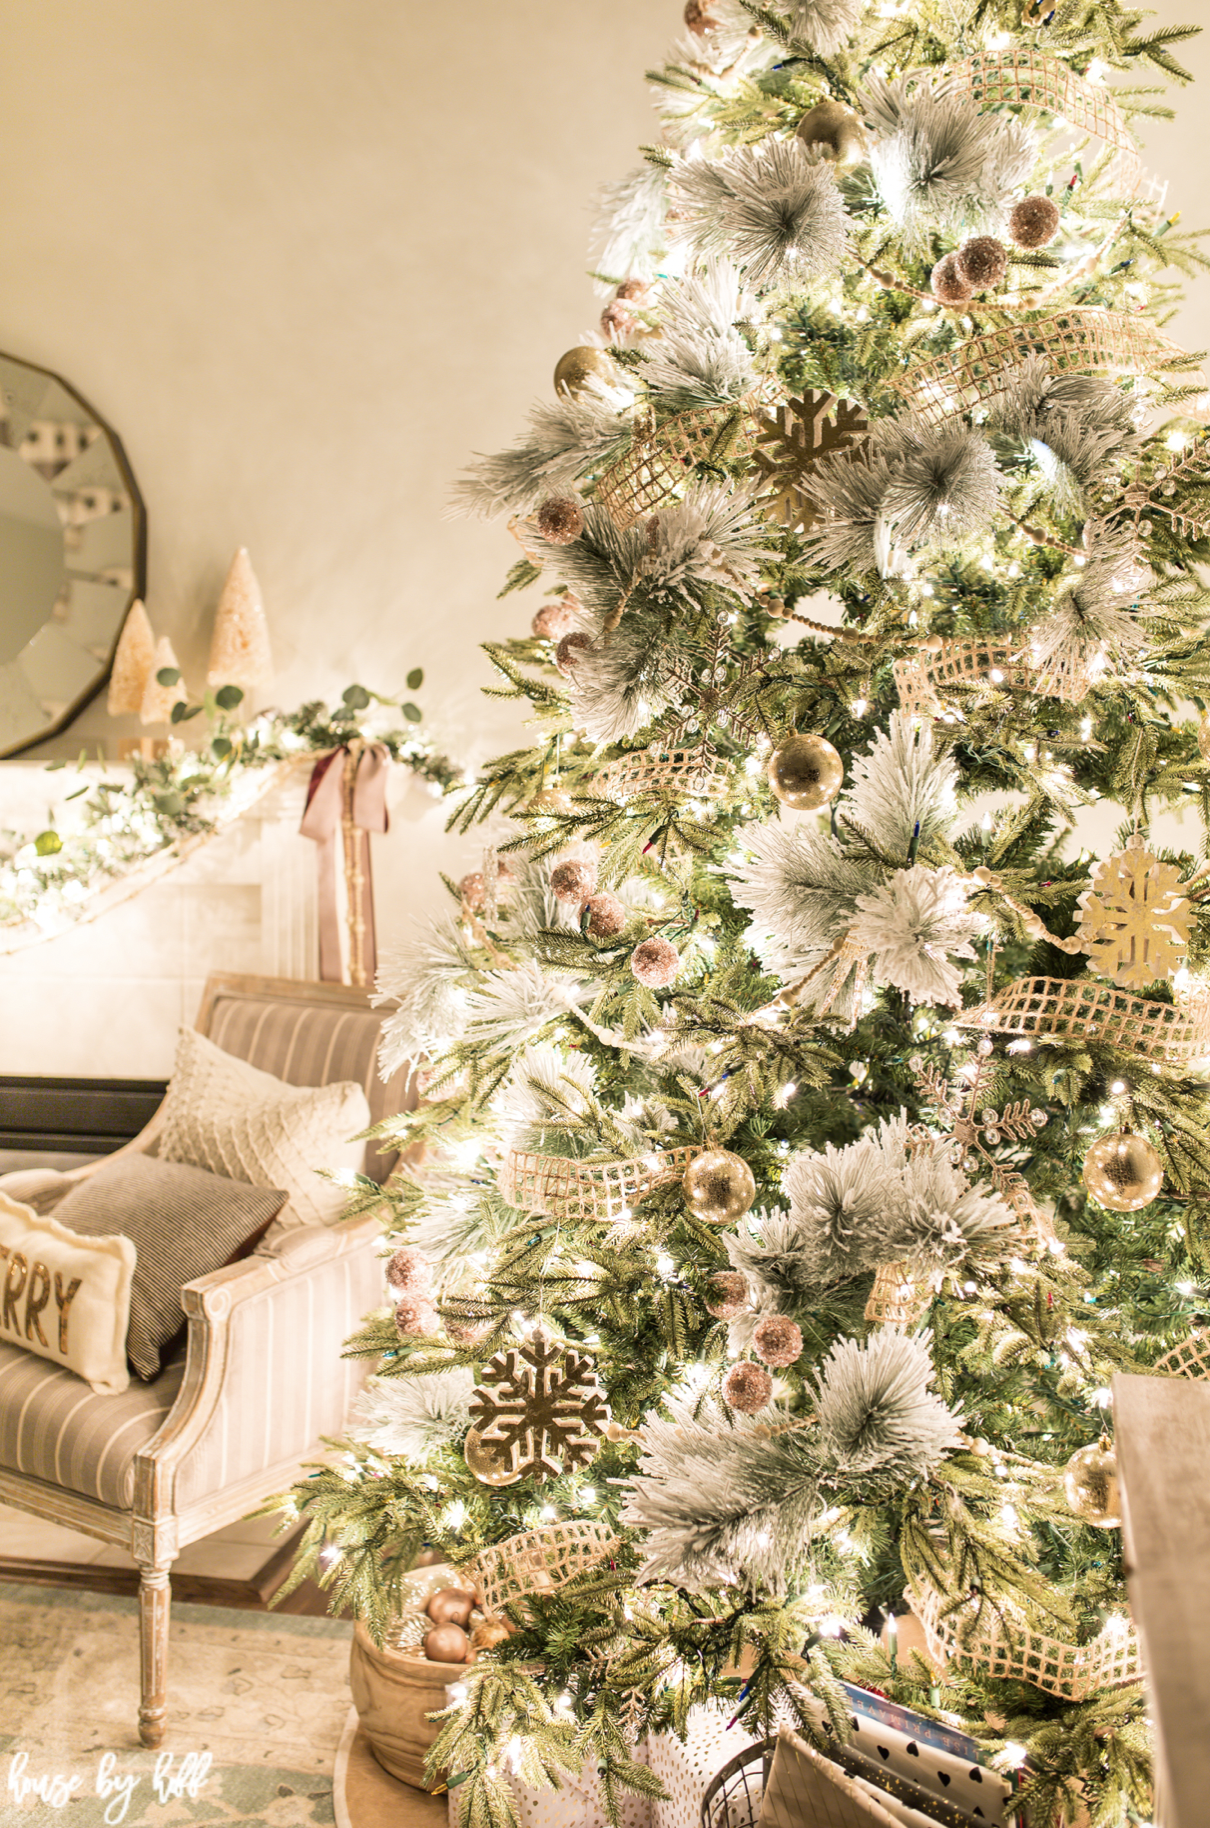 40 Winter Decoration Ideas (Non-Christmas) for 2023 - Beautiful Dawn Designs  | Christmas tree themes, Luxury christmas decor, White christmas trees